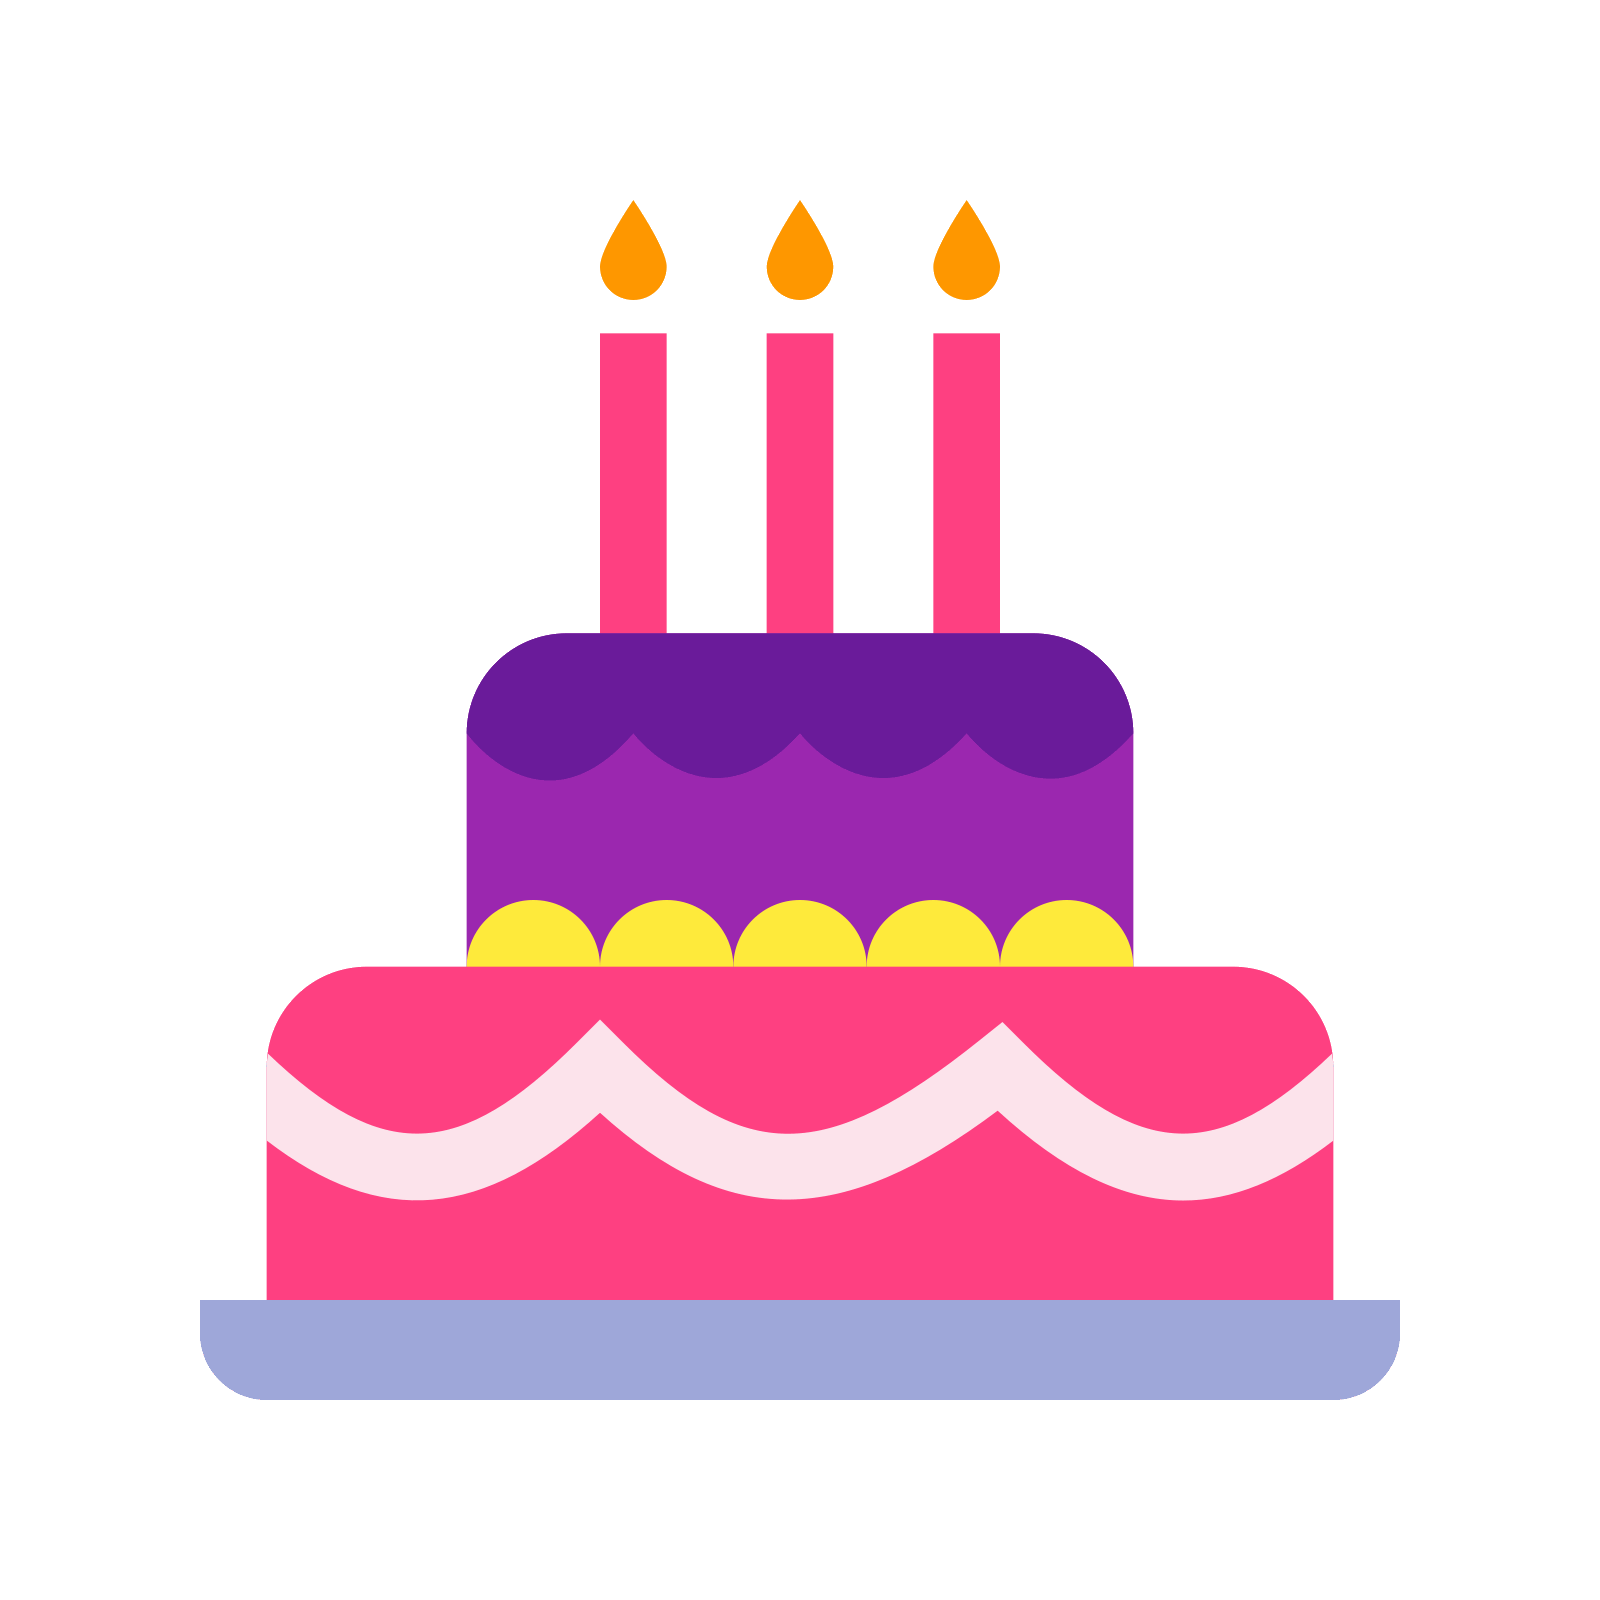 Birthday Cake PNG Clip Art Image | Gallery Yopriceville - High-Quality Free  Images and Transpare… | Birthday cake clip art, Happy birthday cake images,  Cake drawing